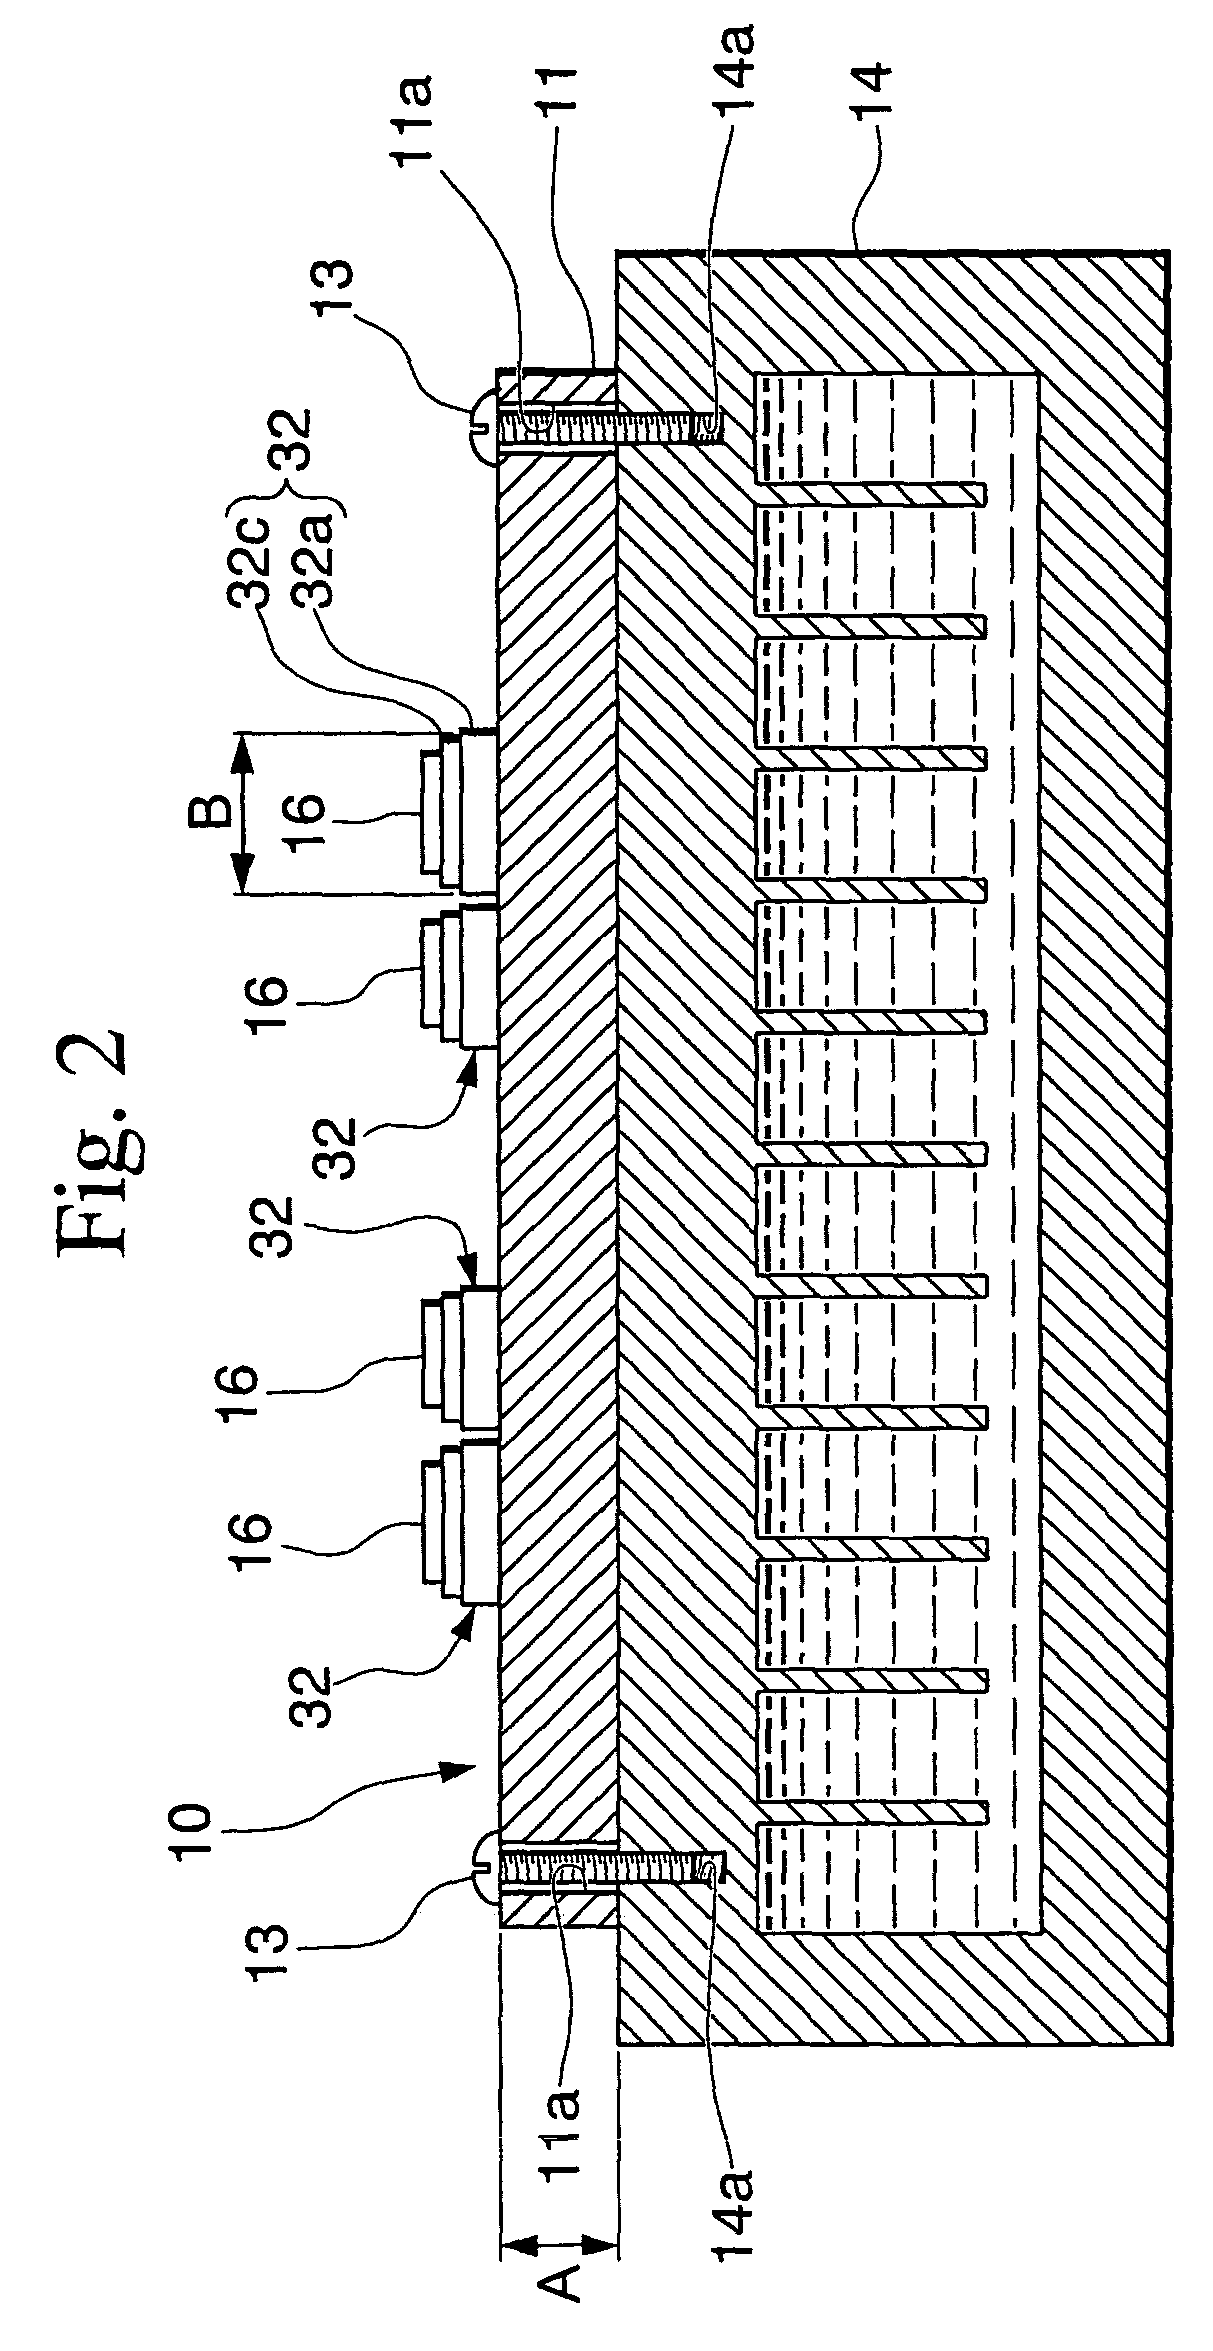 Power module and power module with heat sink